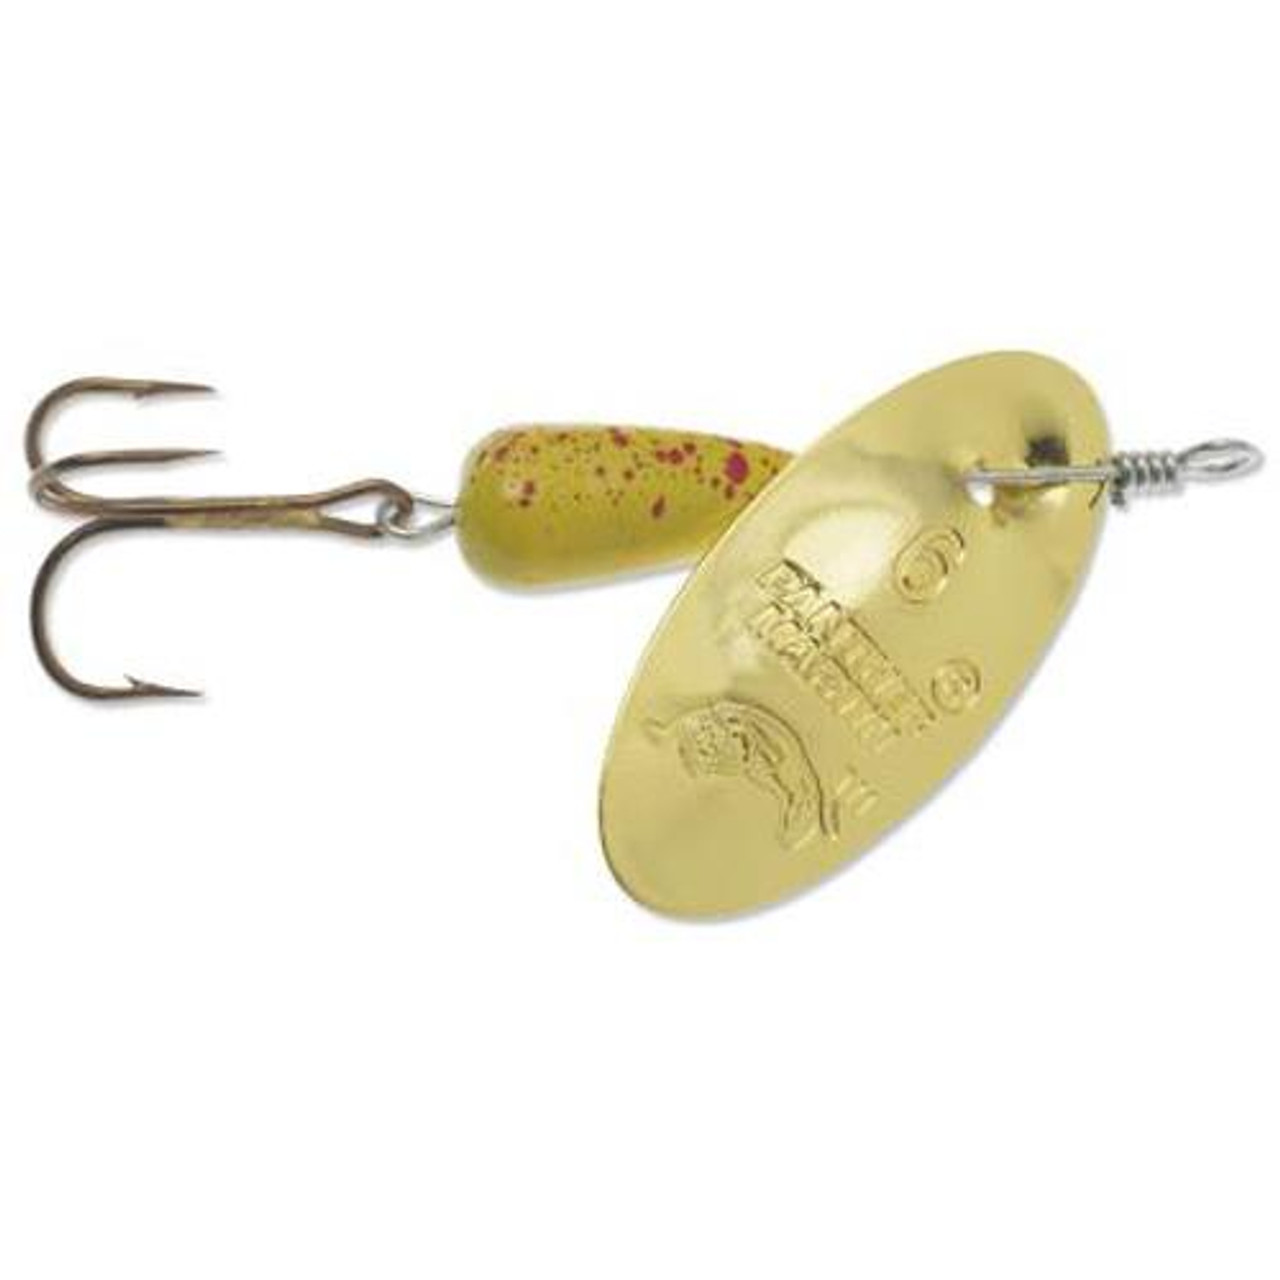 Hammered Spinners - Panther Martin Fishing Lures